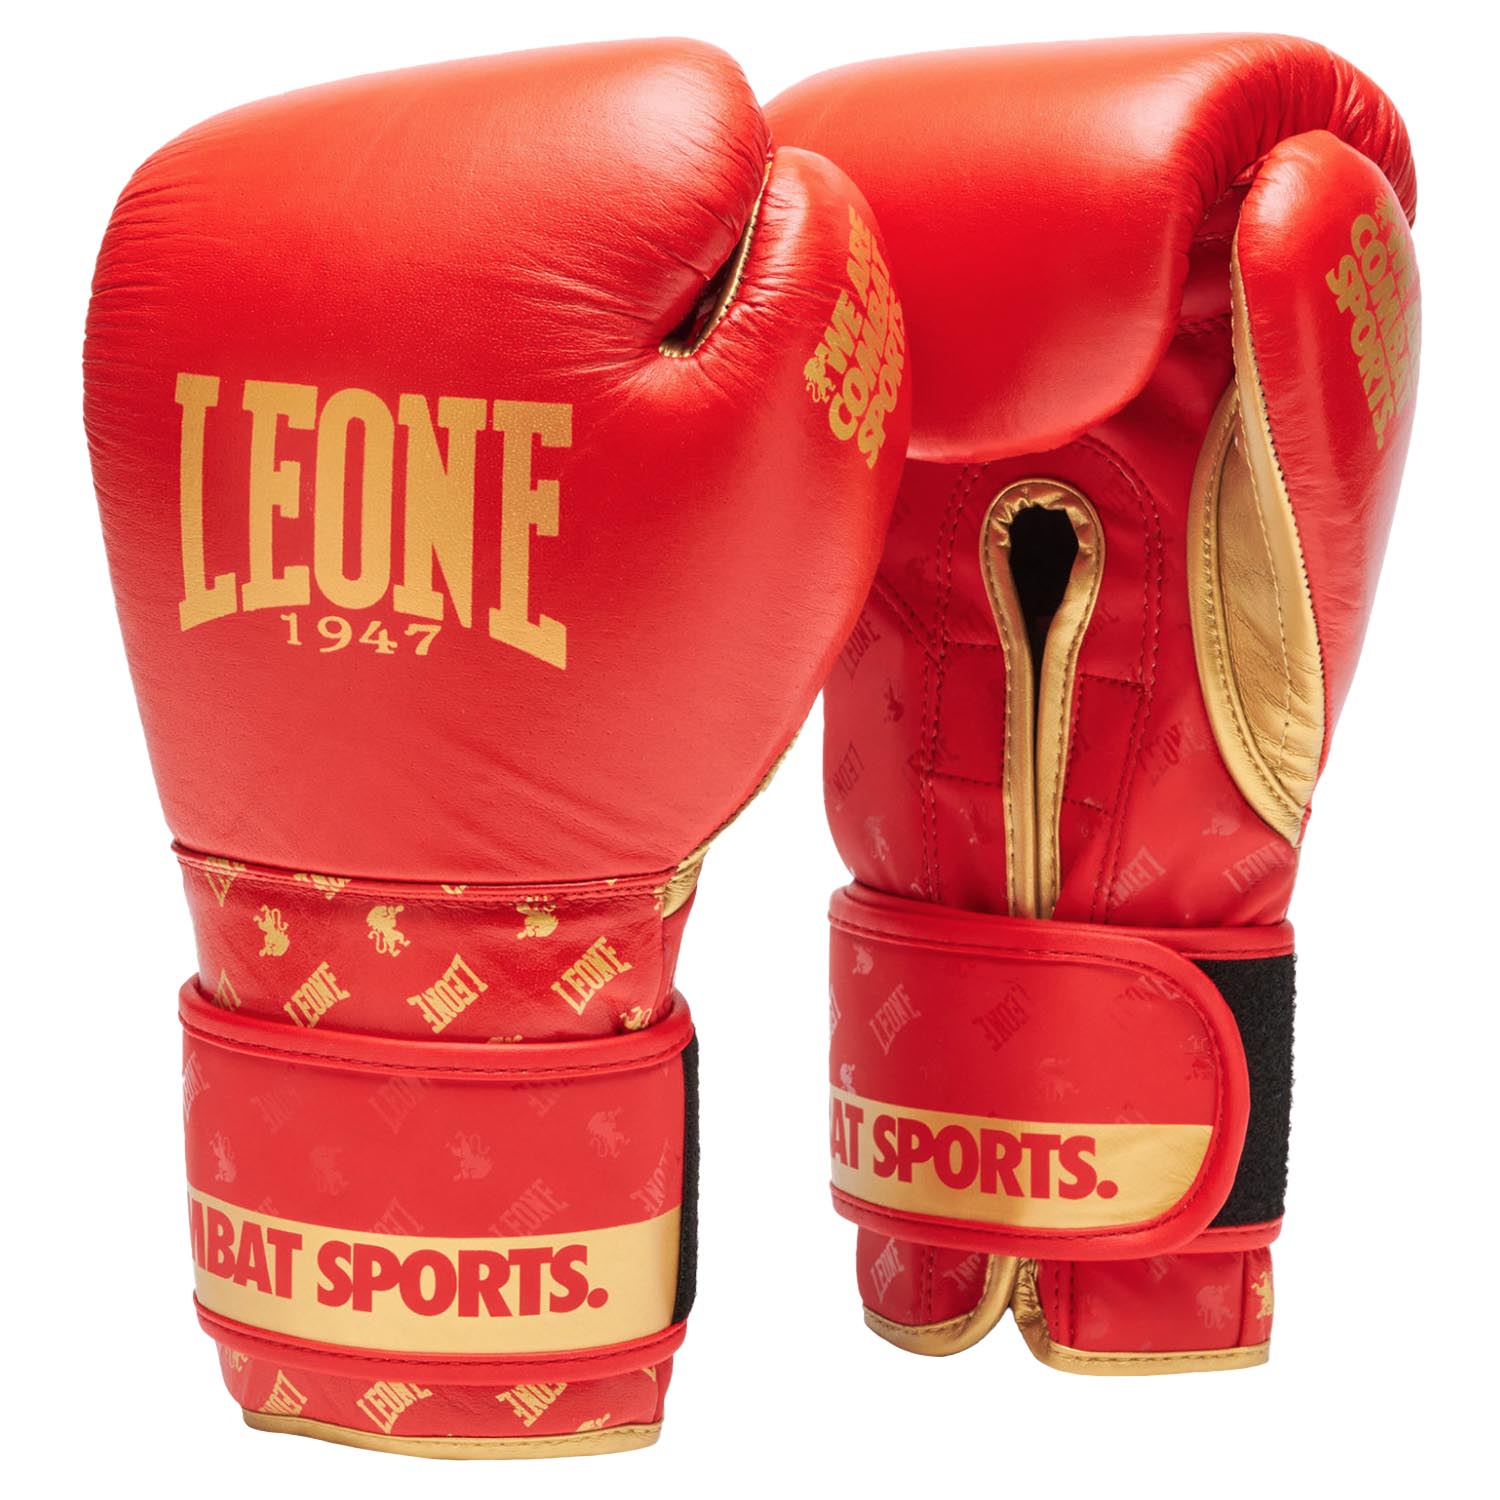 LEONE Boxhandschuhe, DNA, GN220, rot-gold